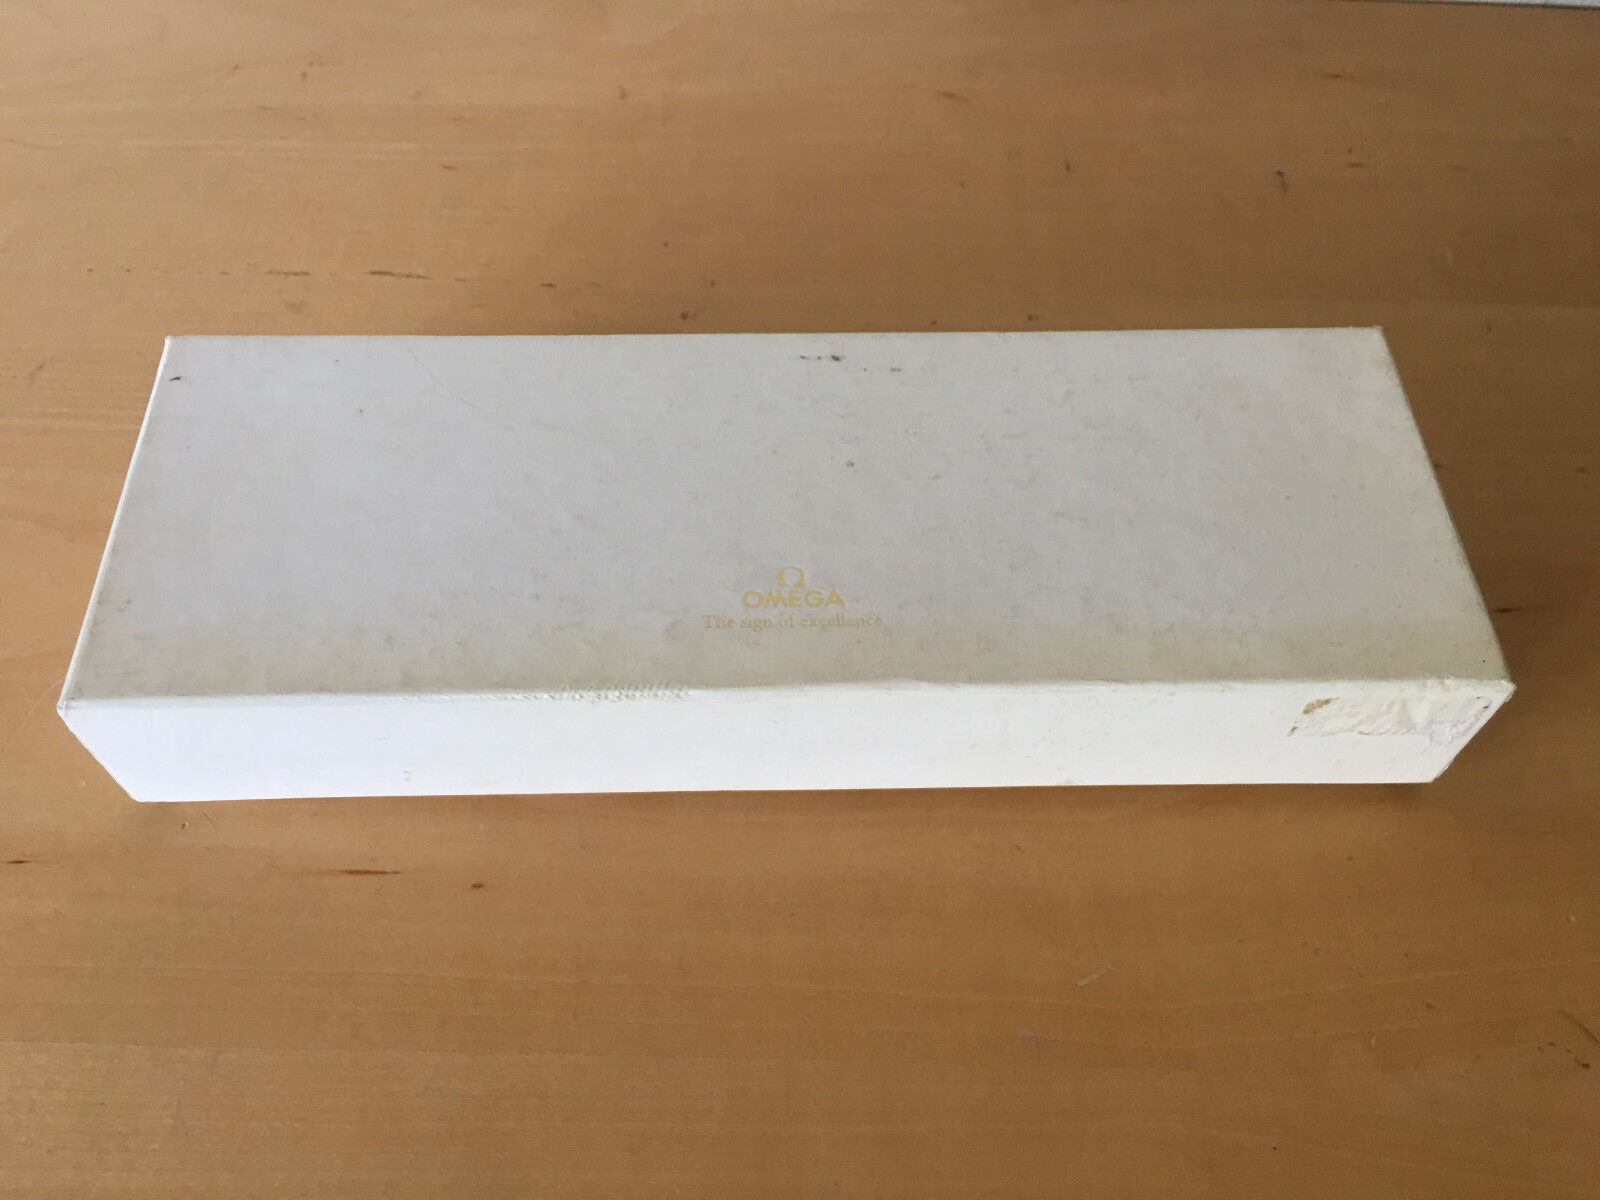 Image of Used - Cardboard Box Omega Schachtel Mit Cartron - 27 5 x 9 5 X 4 5 CM - White -